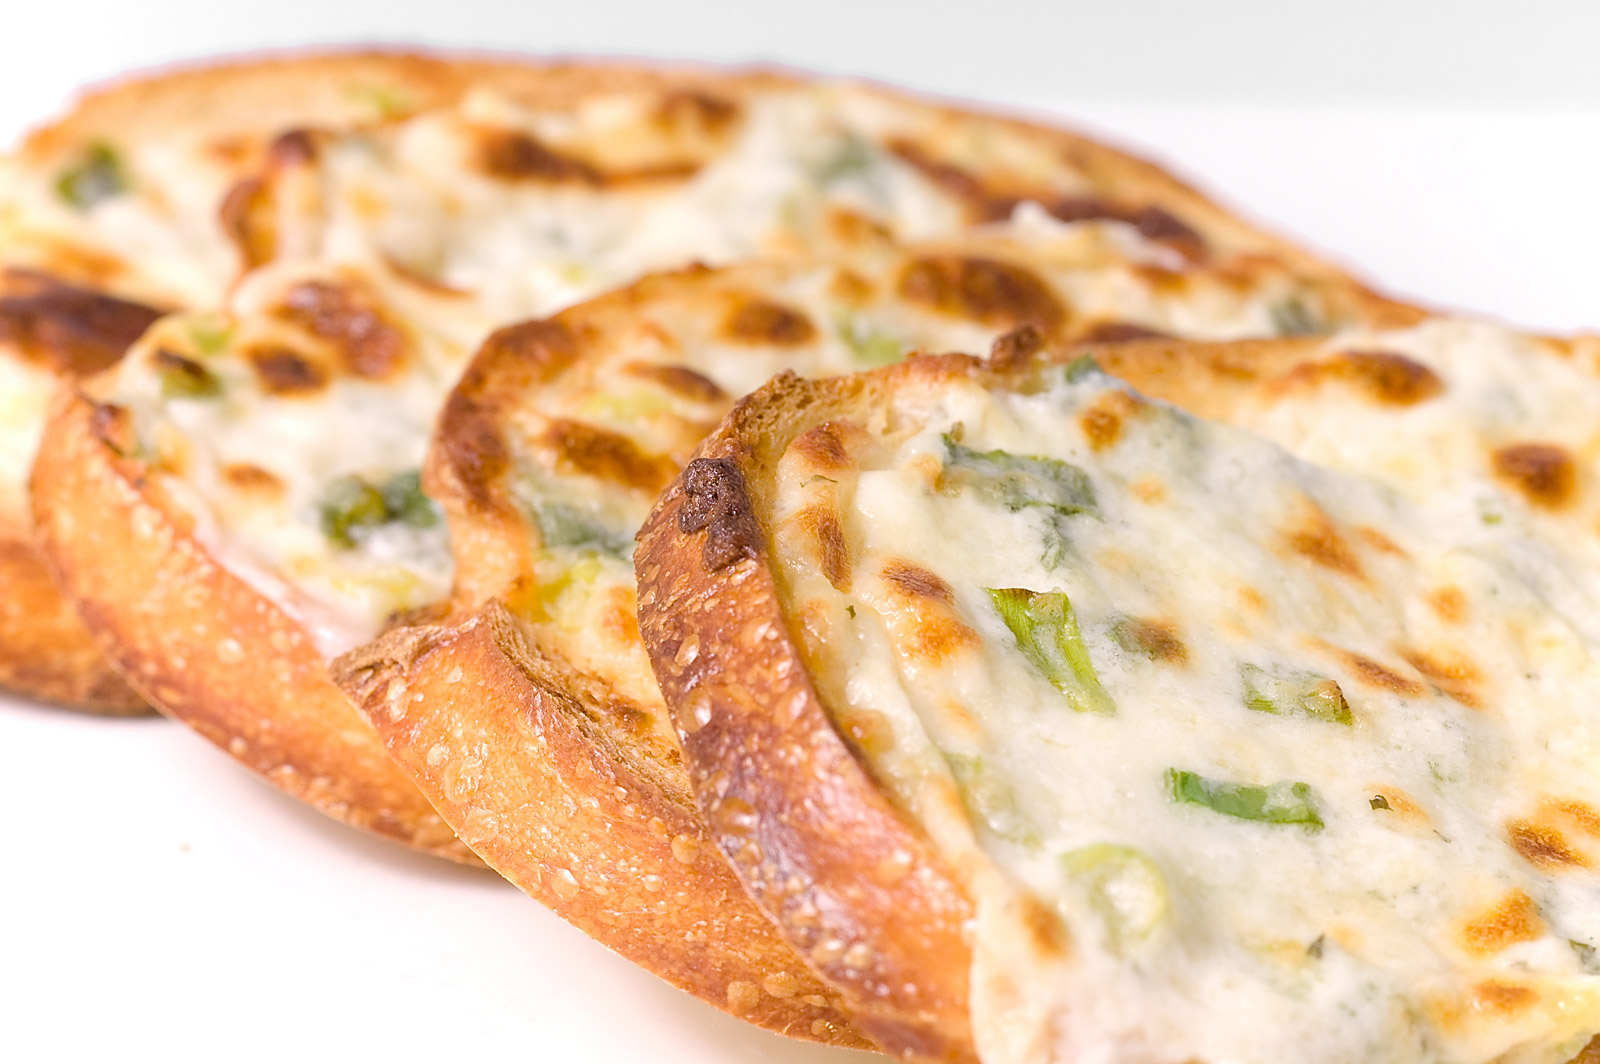 5297-bread-with-cheese-and-garlic.jpg